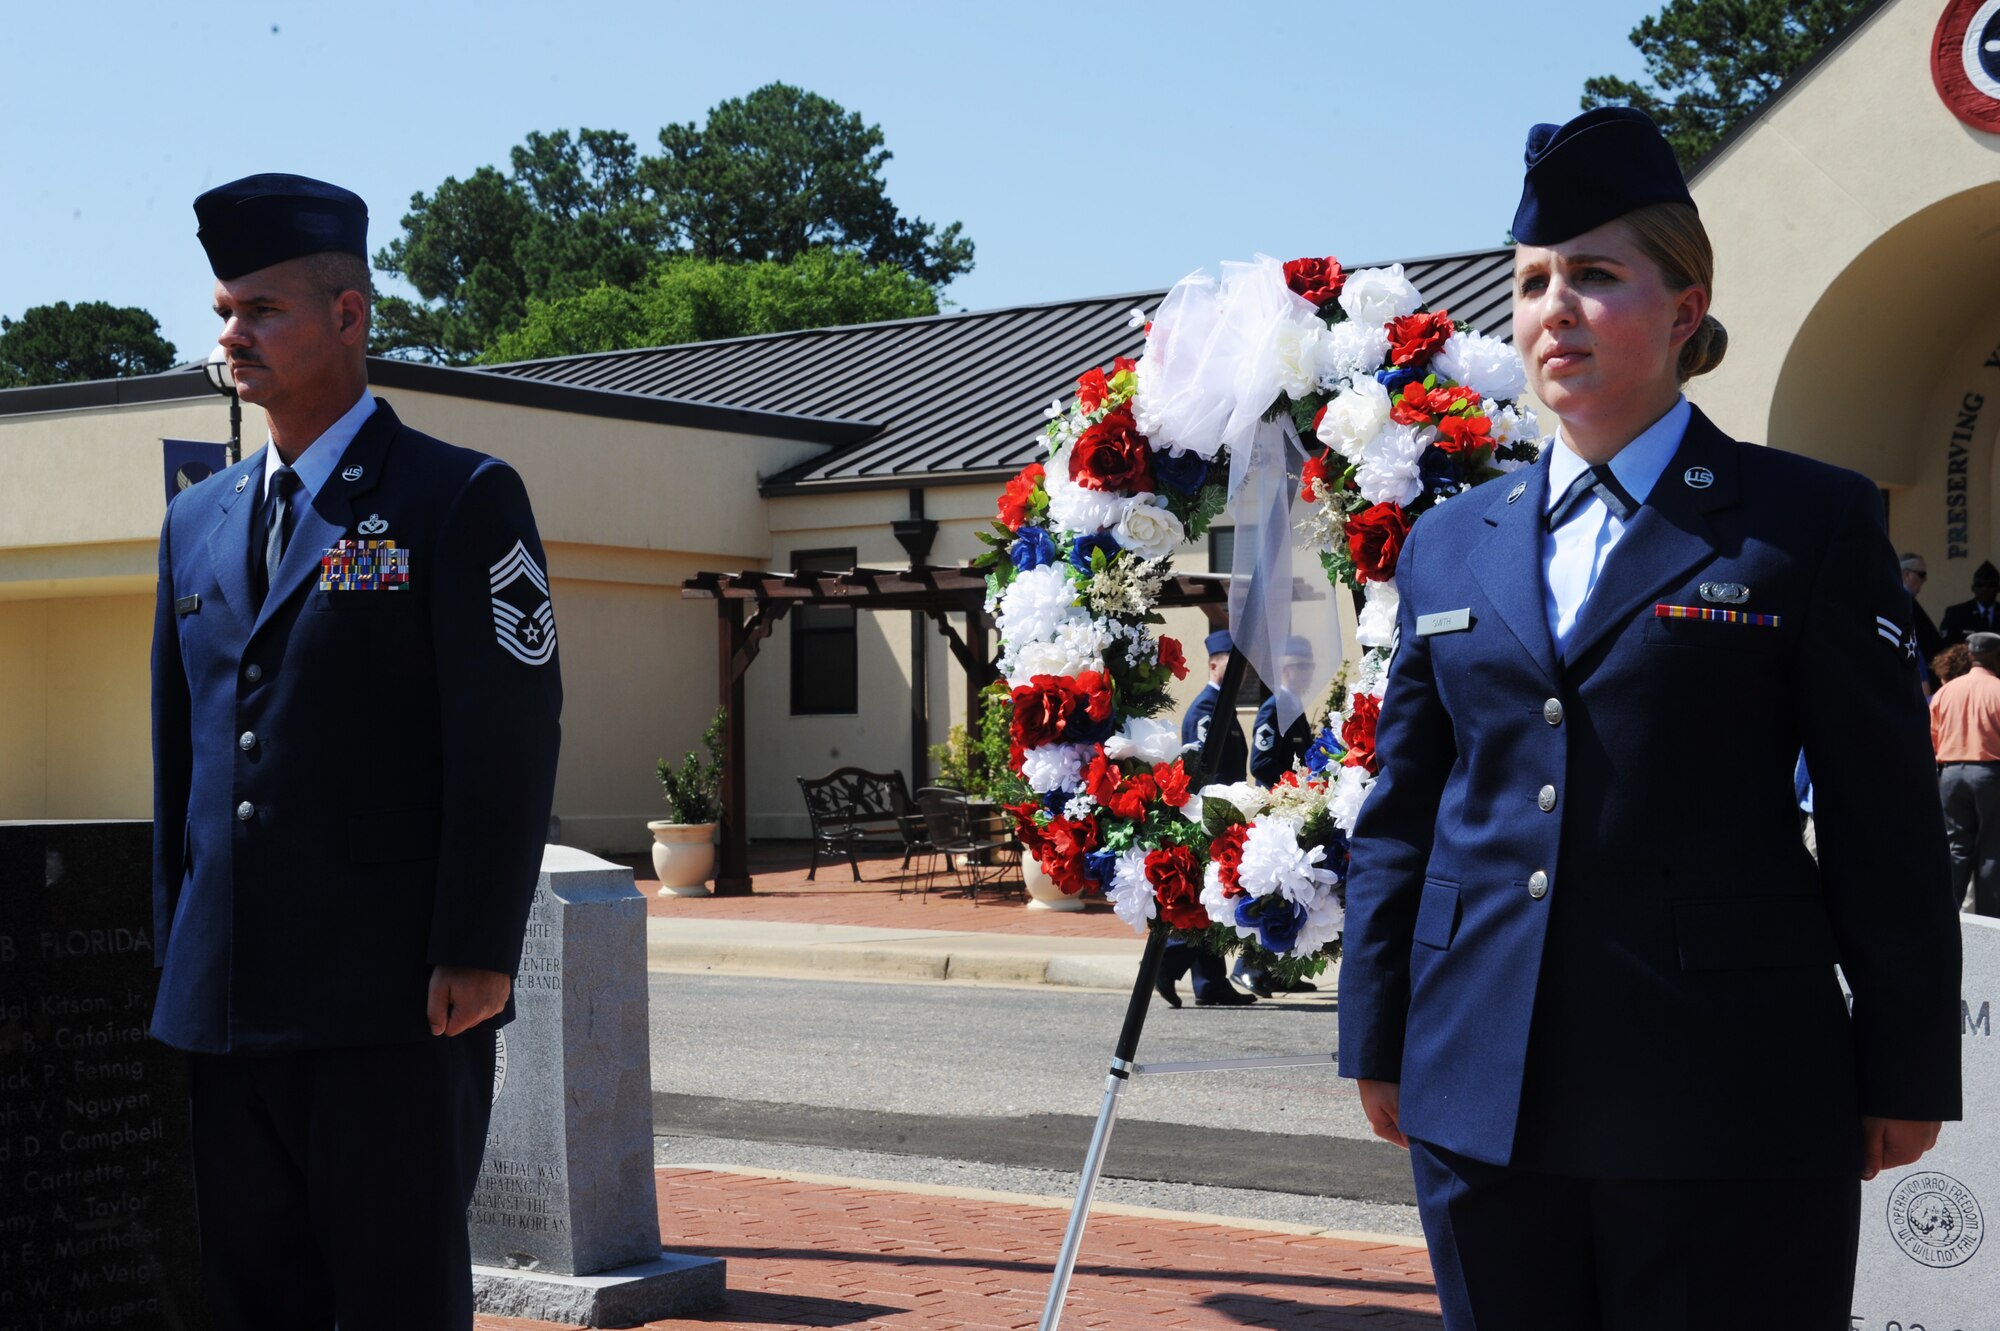 Chief Master Sgt. Derrick Grames, Air Force Life Cycle Management Business and Enterprise Systems Directorate superintendent, and Airman 1st Class Andrea Smith, Barnes Center administration support, present the wreath during the Wreath Laying Ceremony honoring the fallen Airmen of the Khobar Towers attack, June 23, 2016, Maxwell Air Force Base, Ala. Grames represented the highest ranking Airmen who was killed during the attack and Smith was representation of the youngest Airmen who was lost that day. (U.S. Air Force photo/Senior Airman Alexa Culbert)